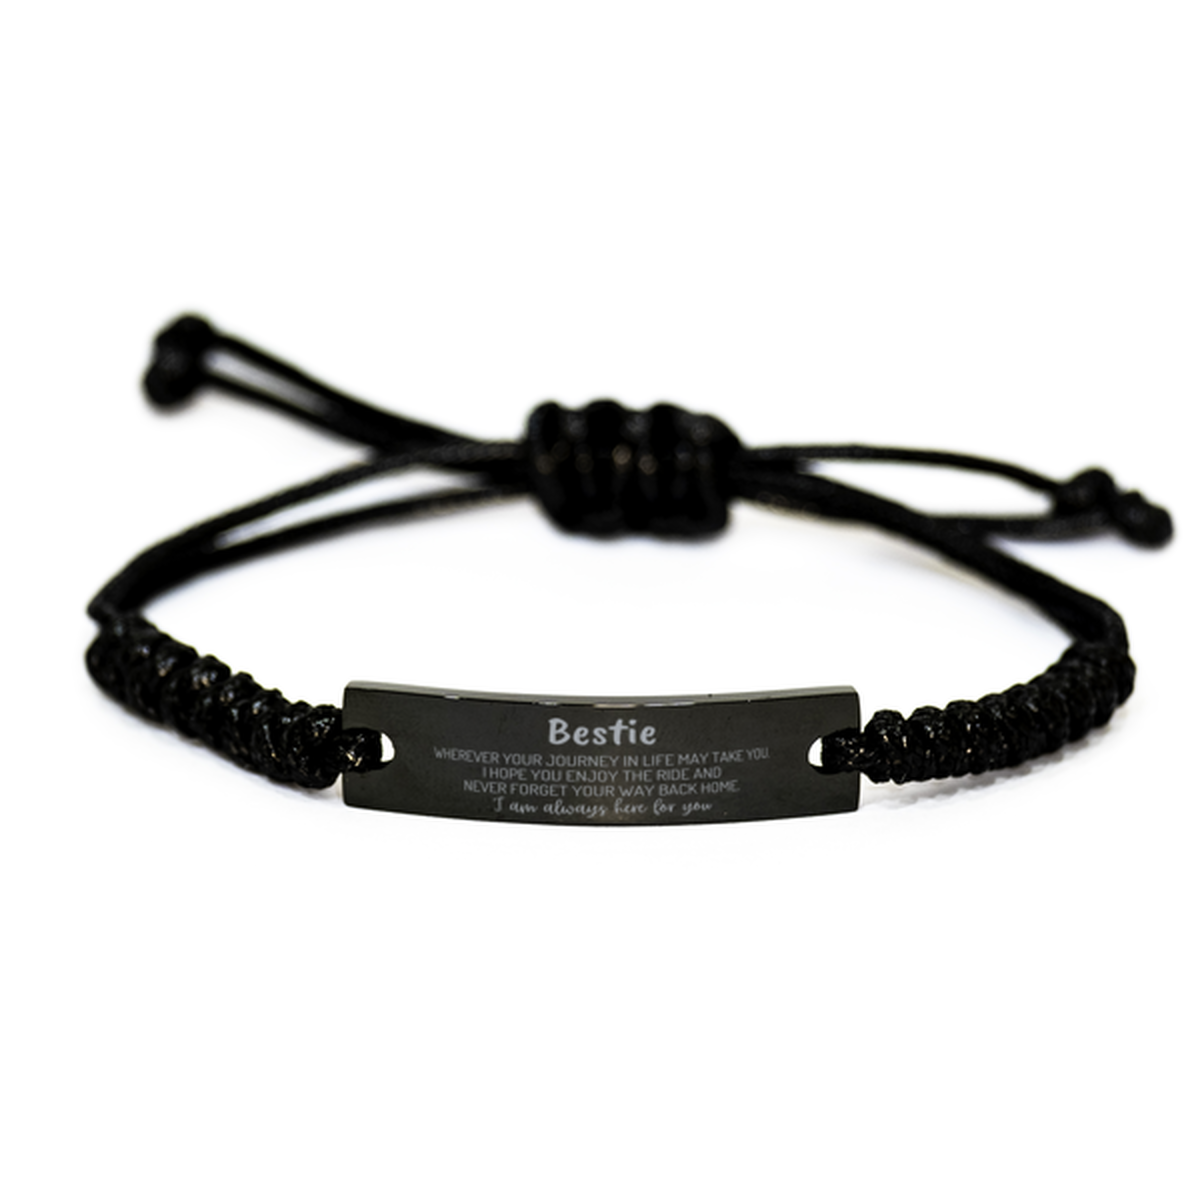 Bestie wherever your journey in life may take you, I am always here for you Bestie Black Rope Bracelet, Awesome Christmas Gifts For Bestie, Bestie Birthday Gifts for Men Women Family Loved One